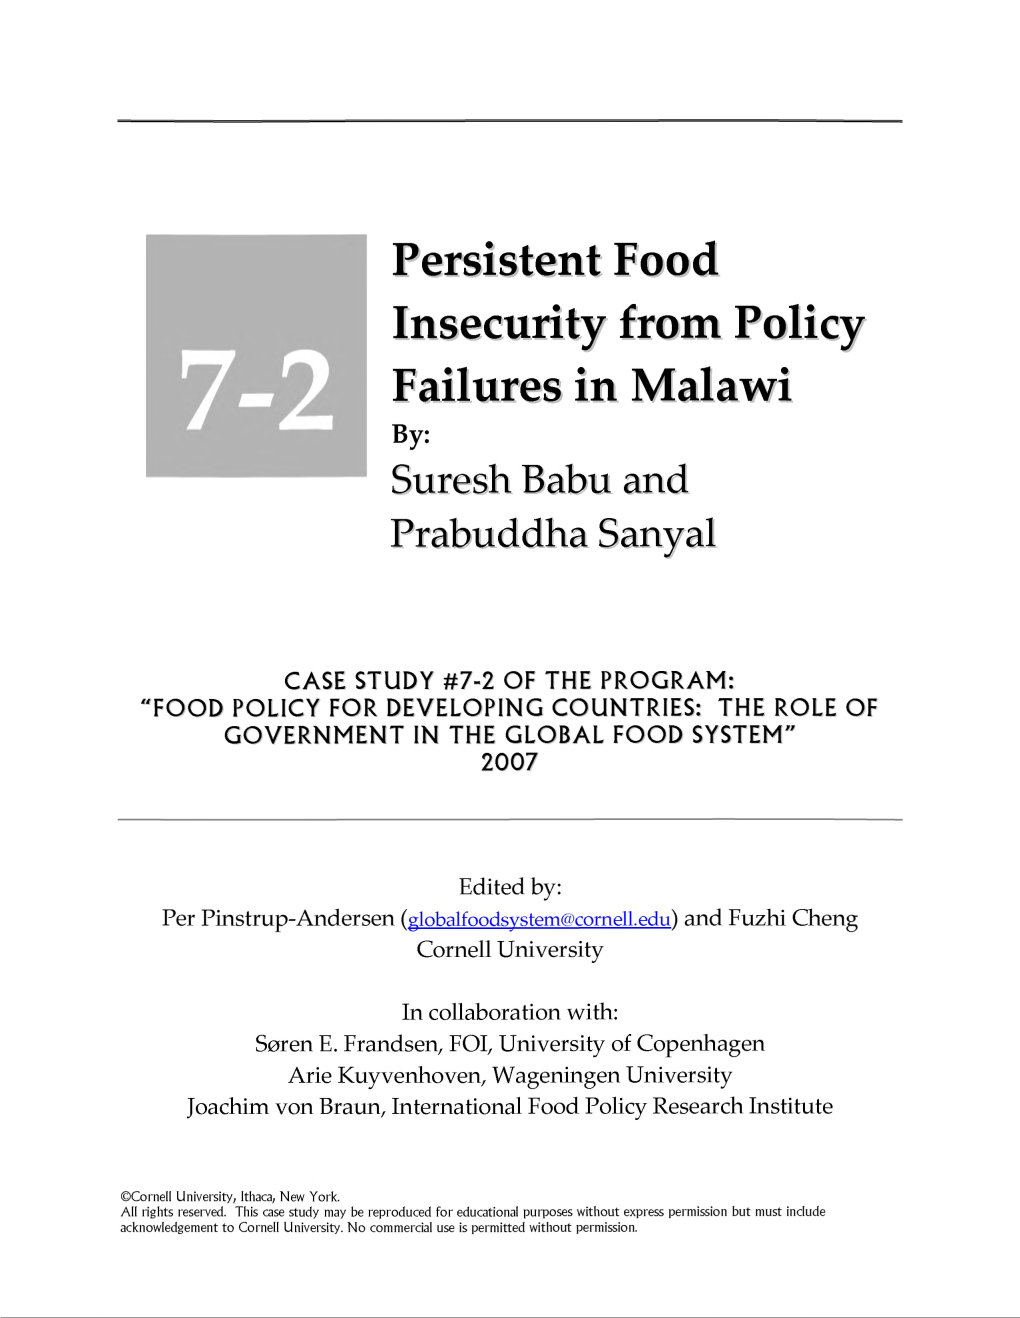 Persistent Food Insecurity from Policy Failures in Malawi By: Suresh Babu and Prabuddha Sanyal